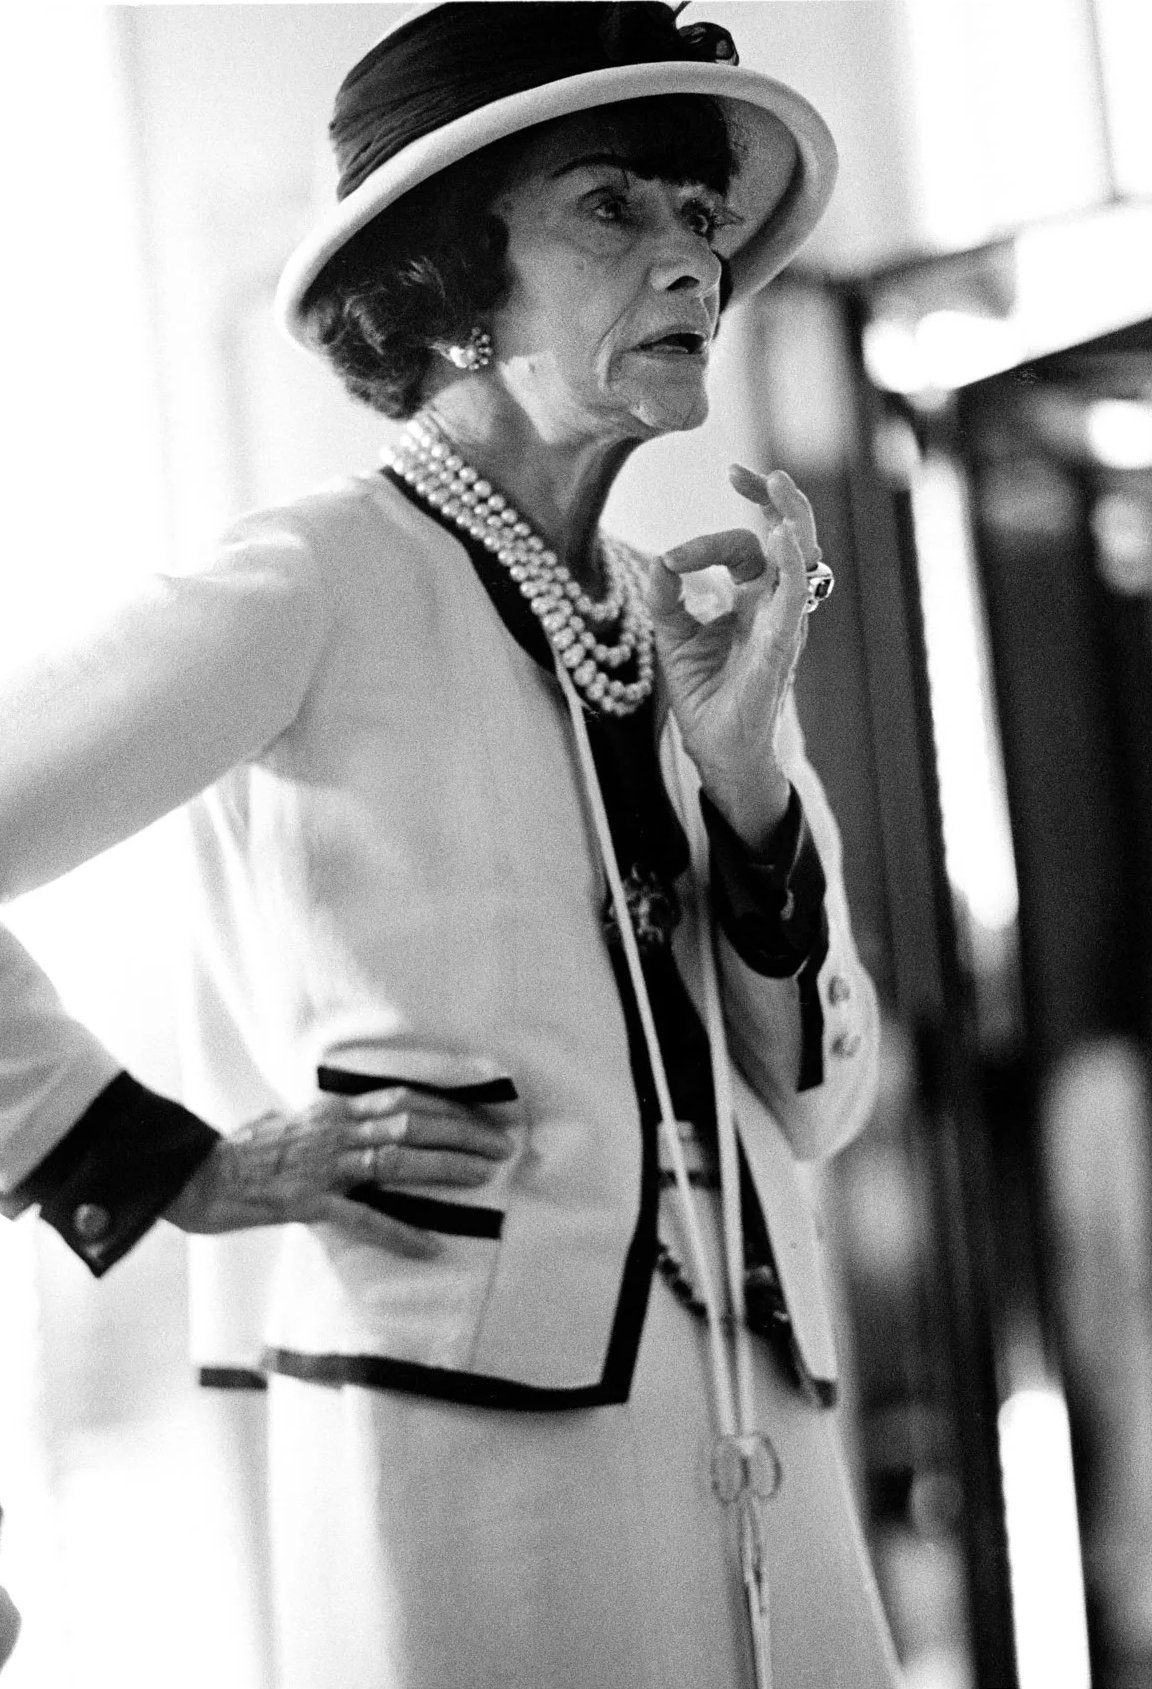 All You Need To Know About The Iconic Chanel Jacket